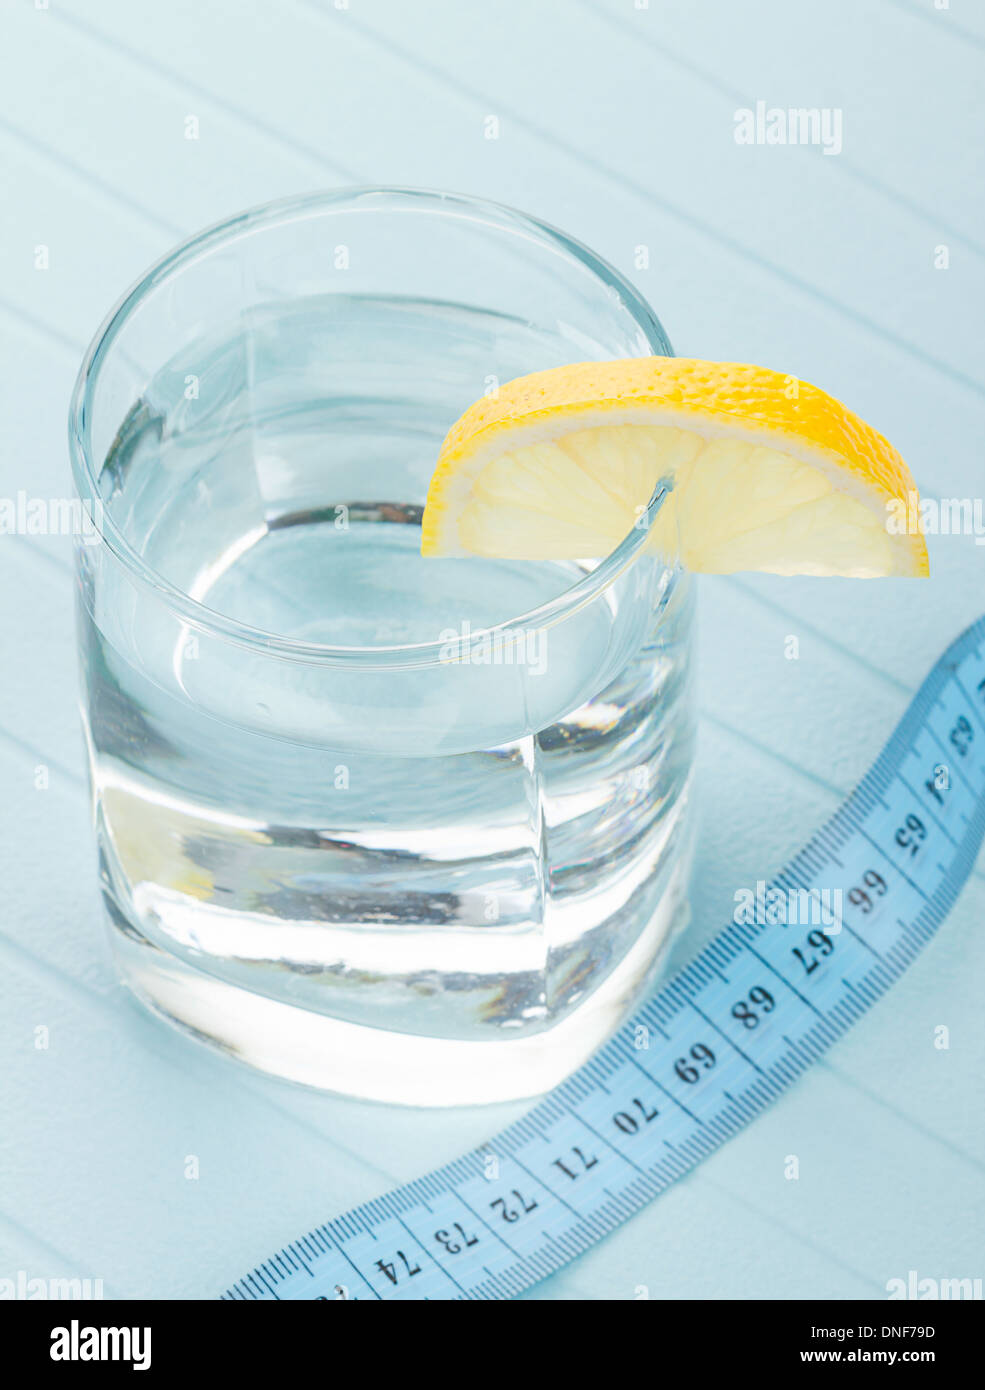 Pure water for healthy life with measure tape Stock Photo